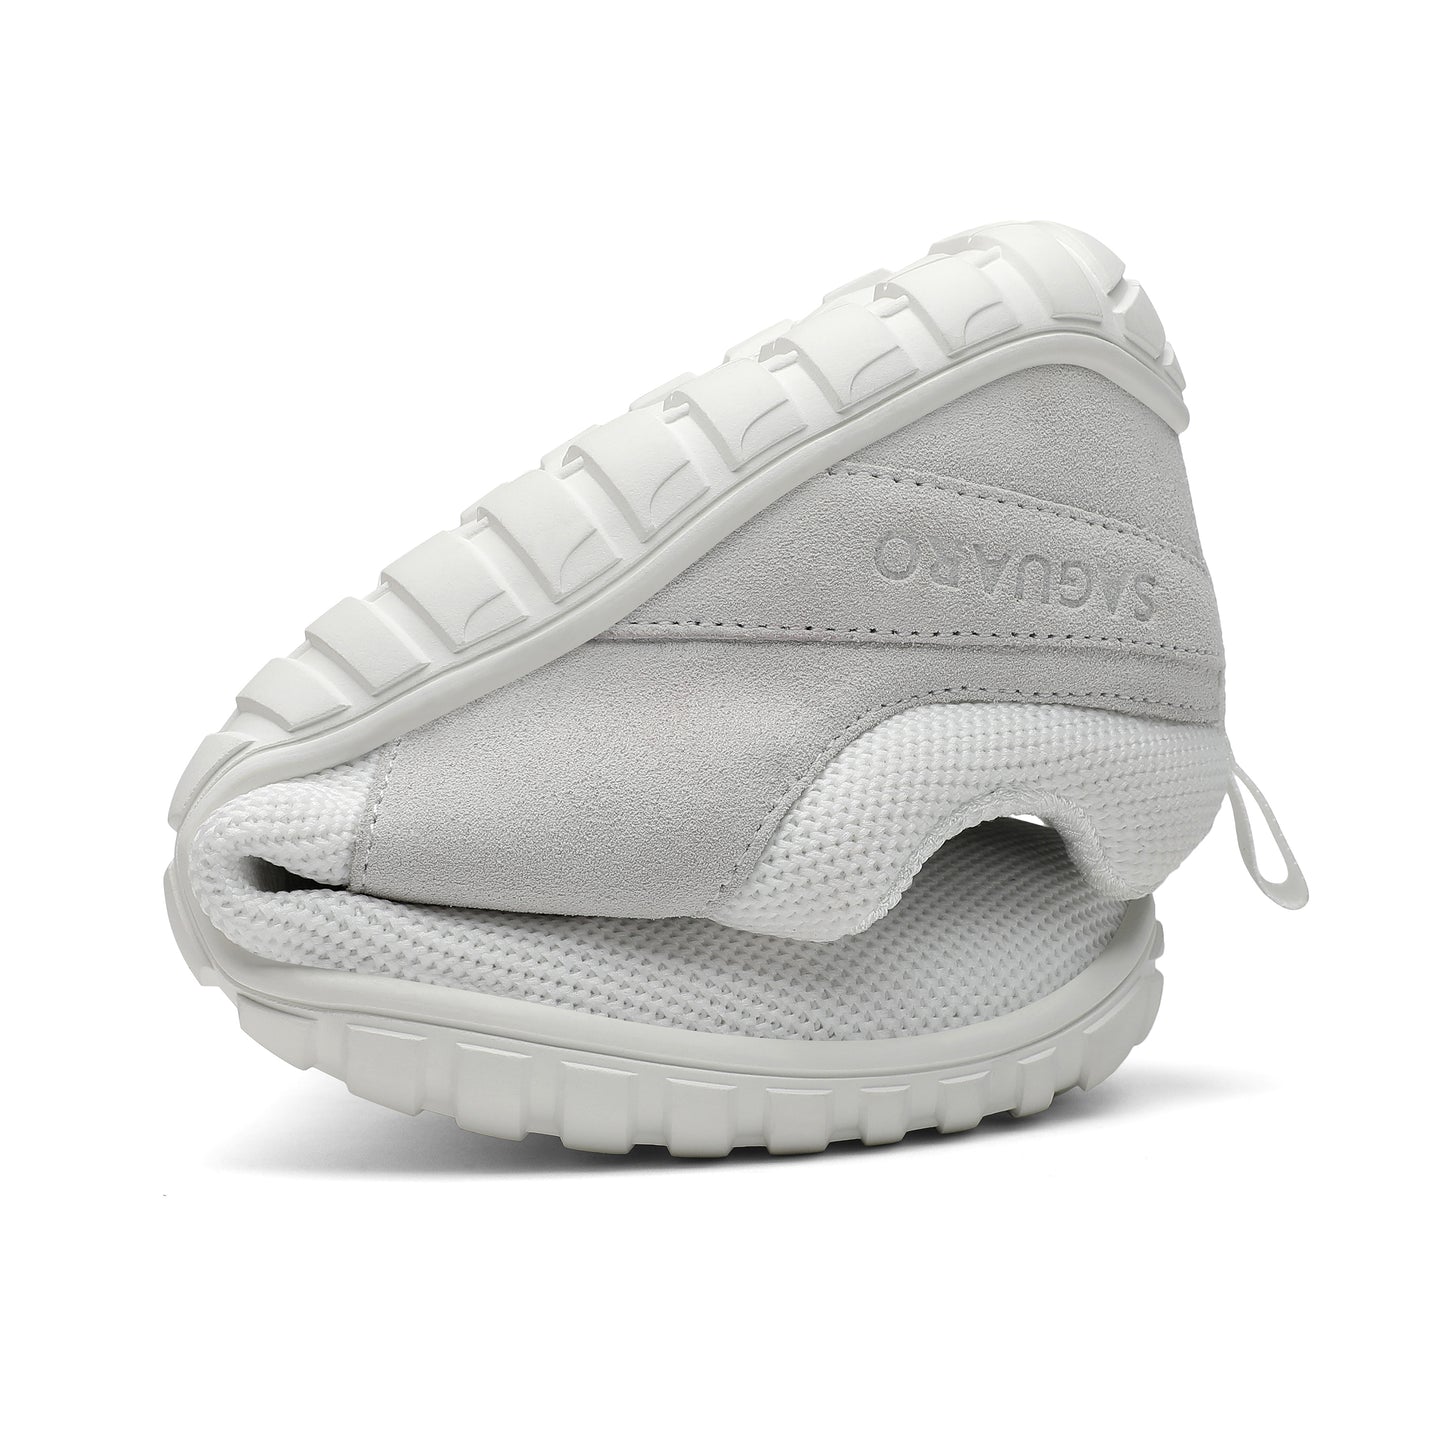 Wish I - Blanco - Casual Barefoot shoes